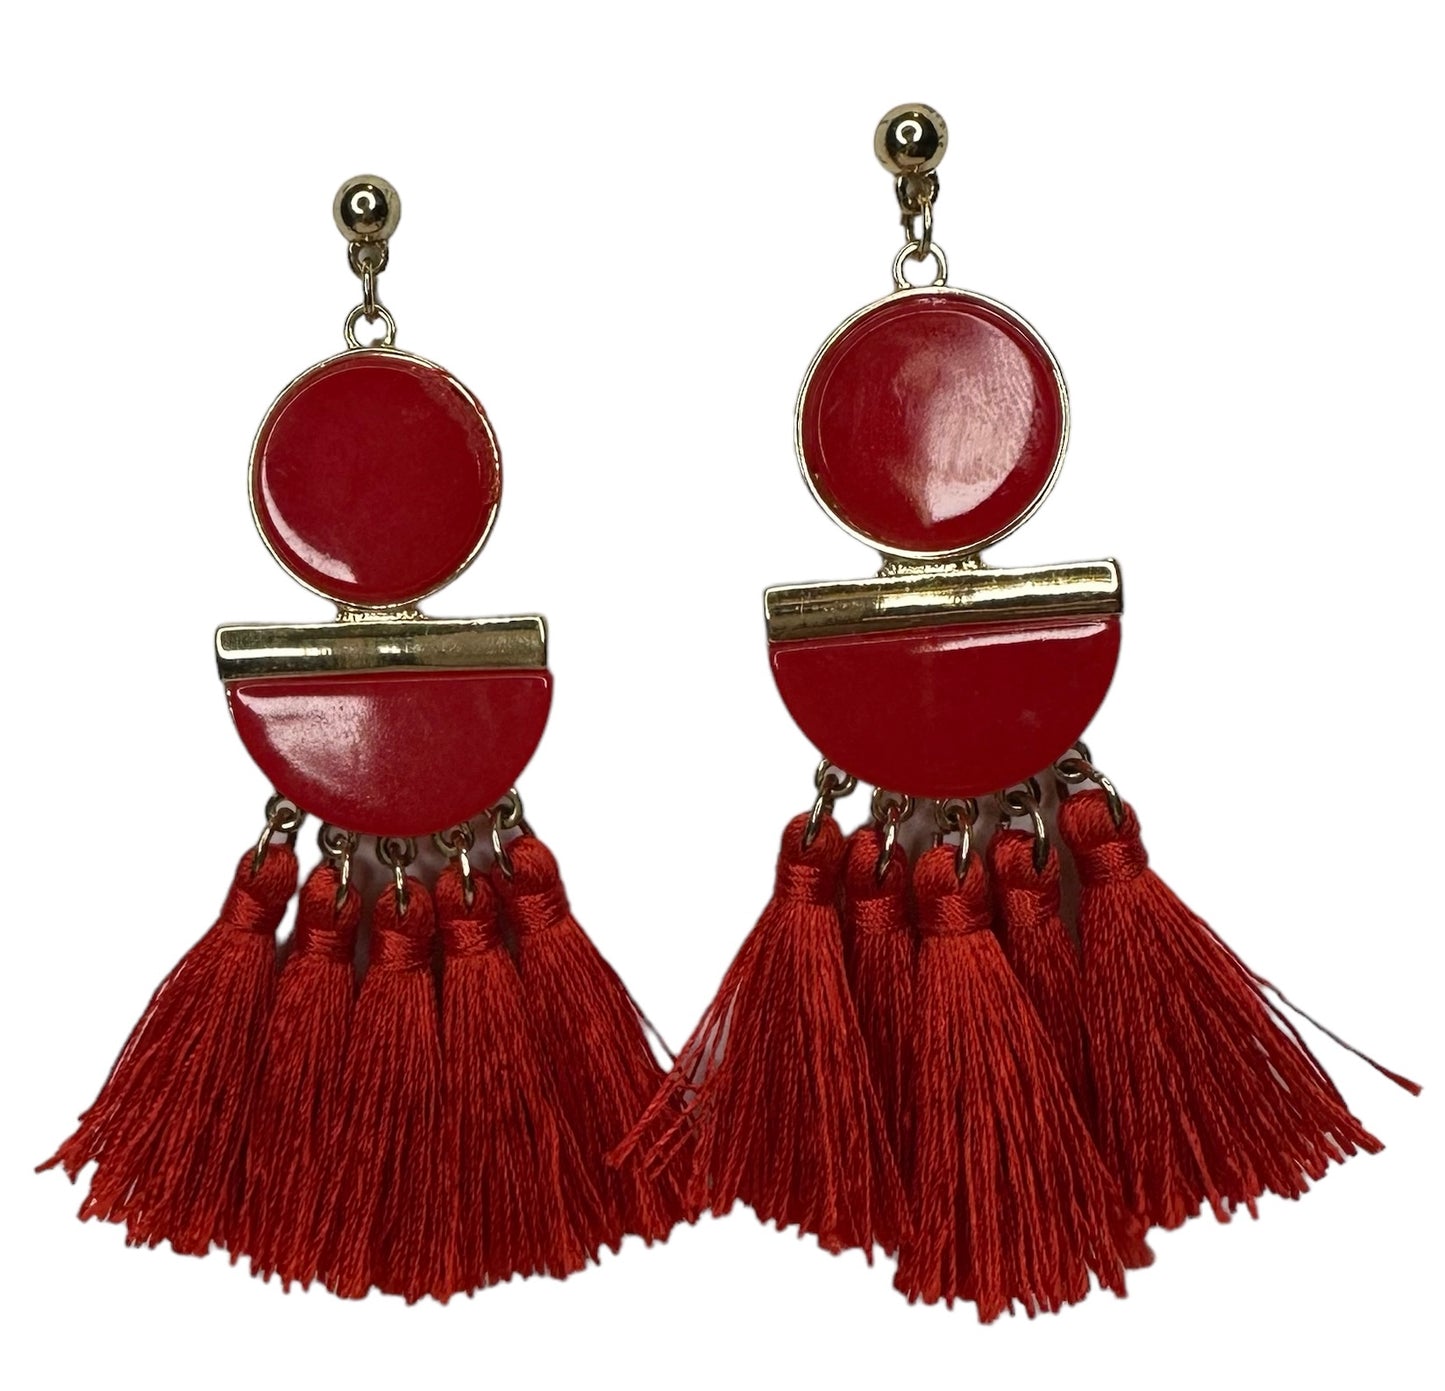 Red and Gold Tassel Earrings